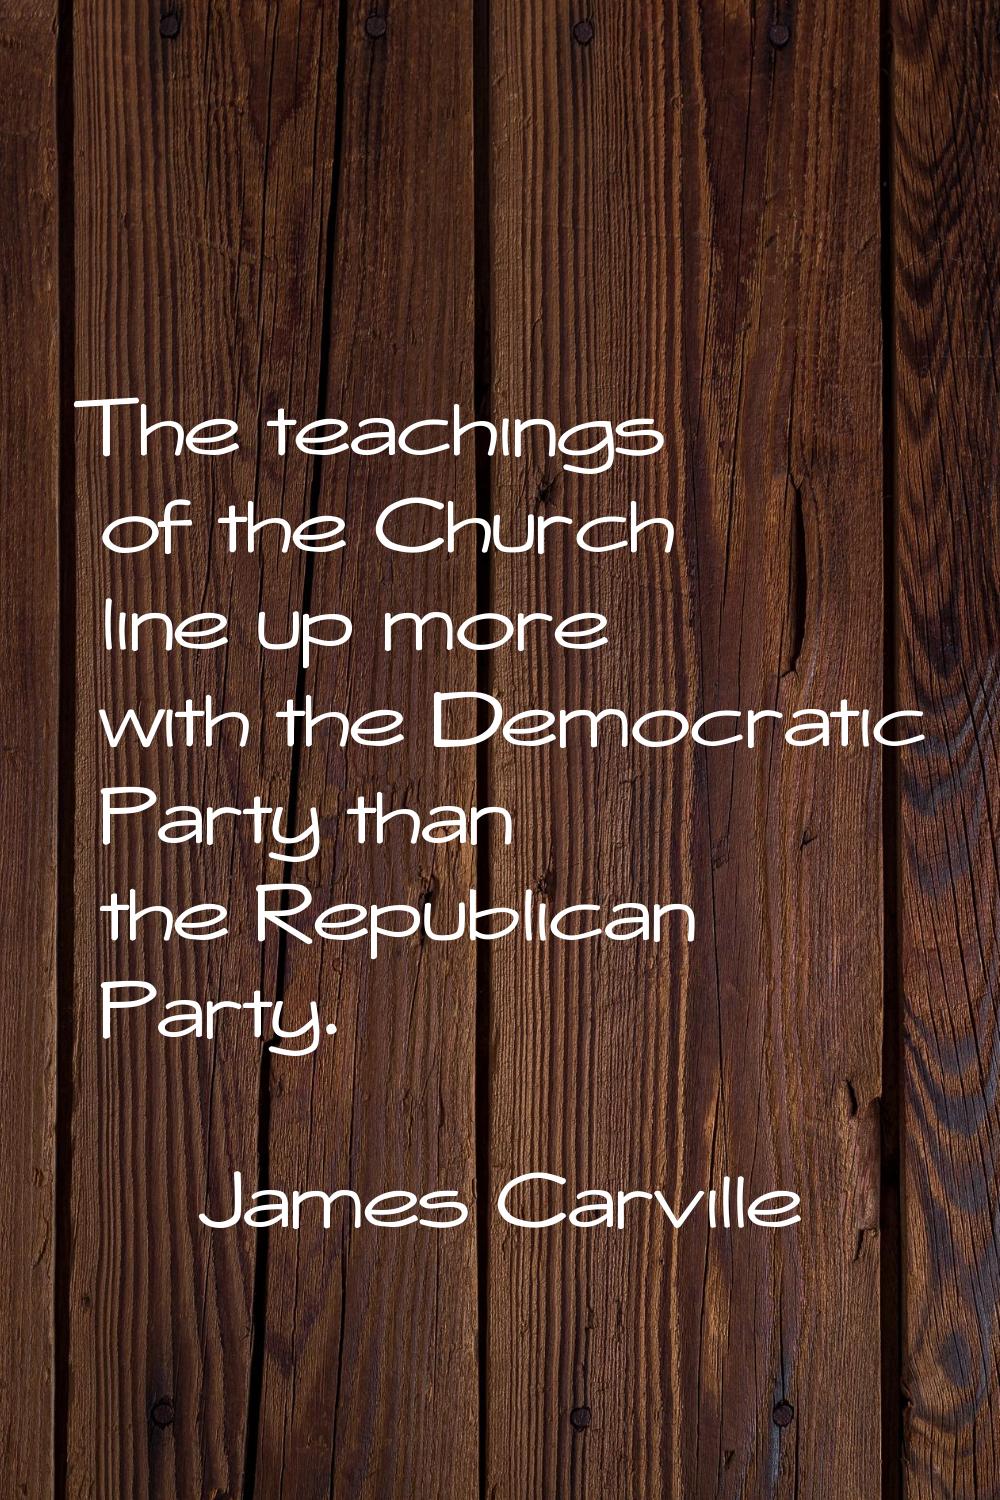 The teachings of the Church line up more with the Democratic Party than the Republican Party.